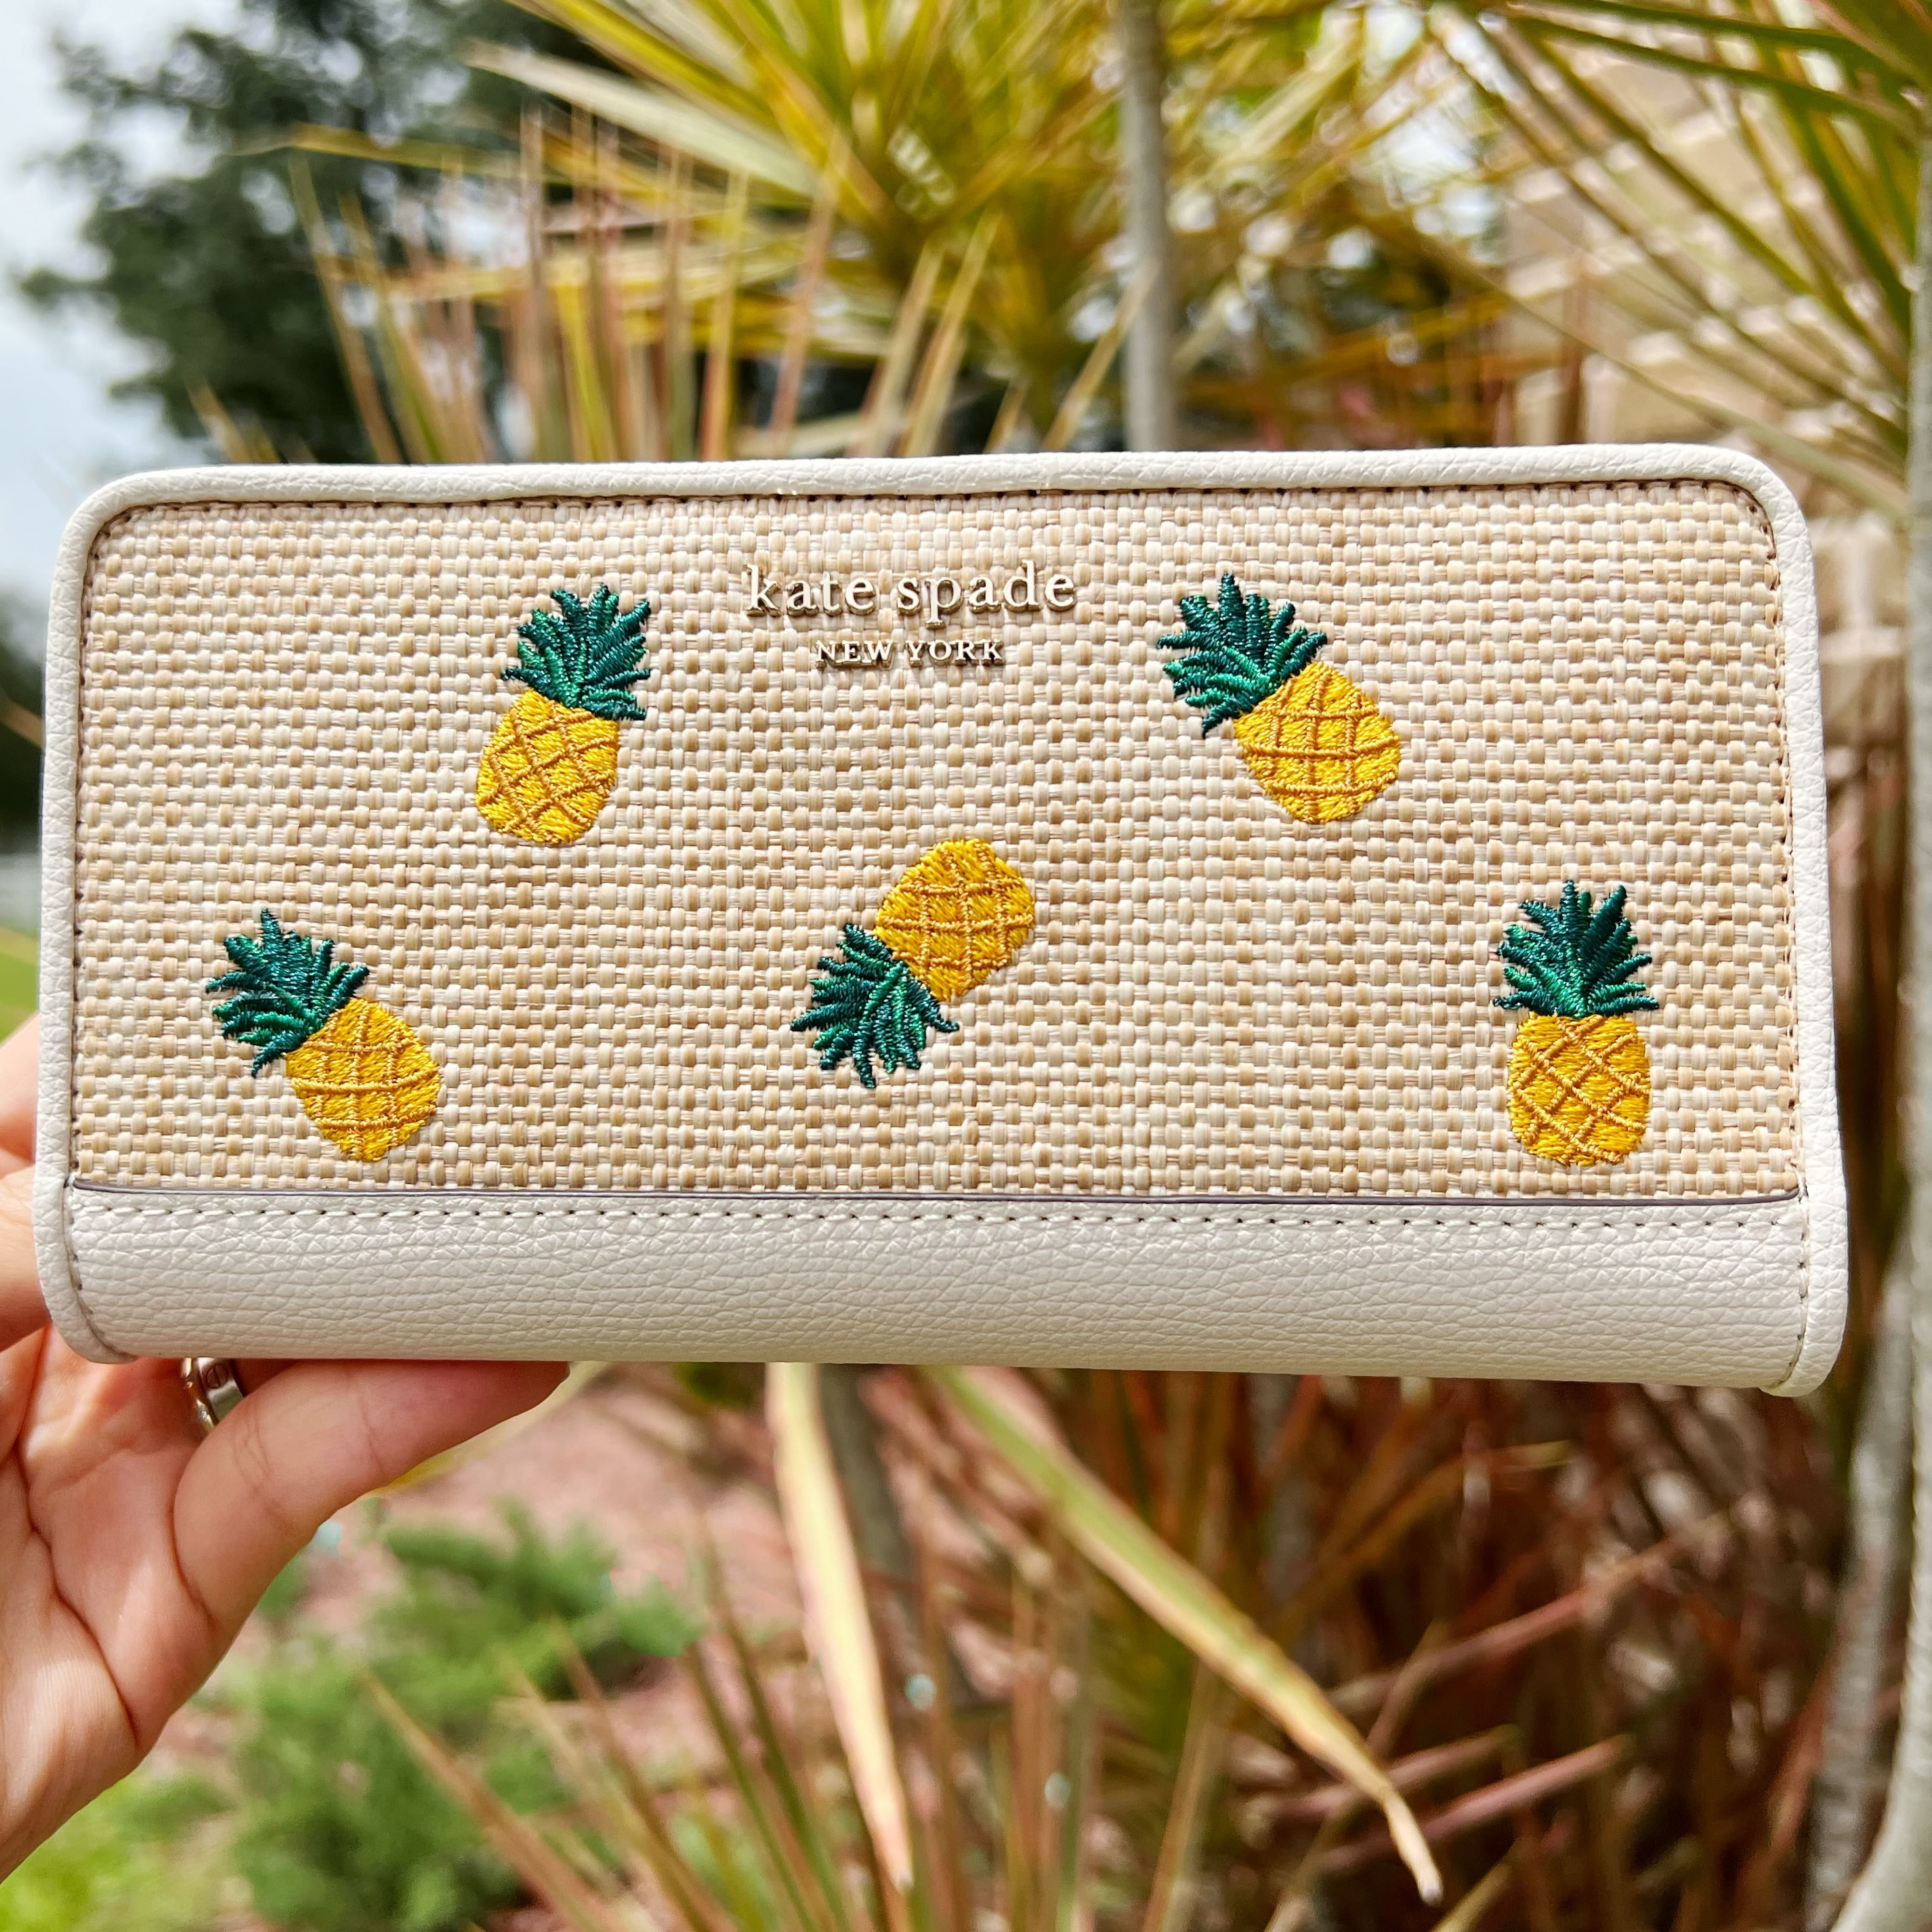 KATE SPADE BY THE POOL 3D PINEAPPLE BAG | Taschen